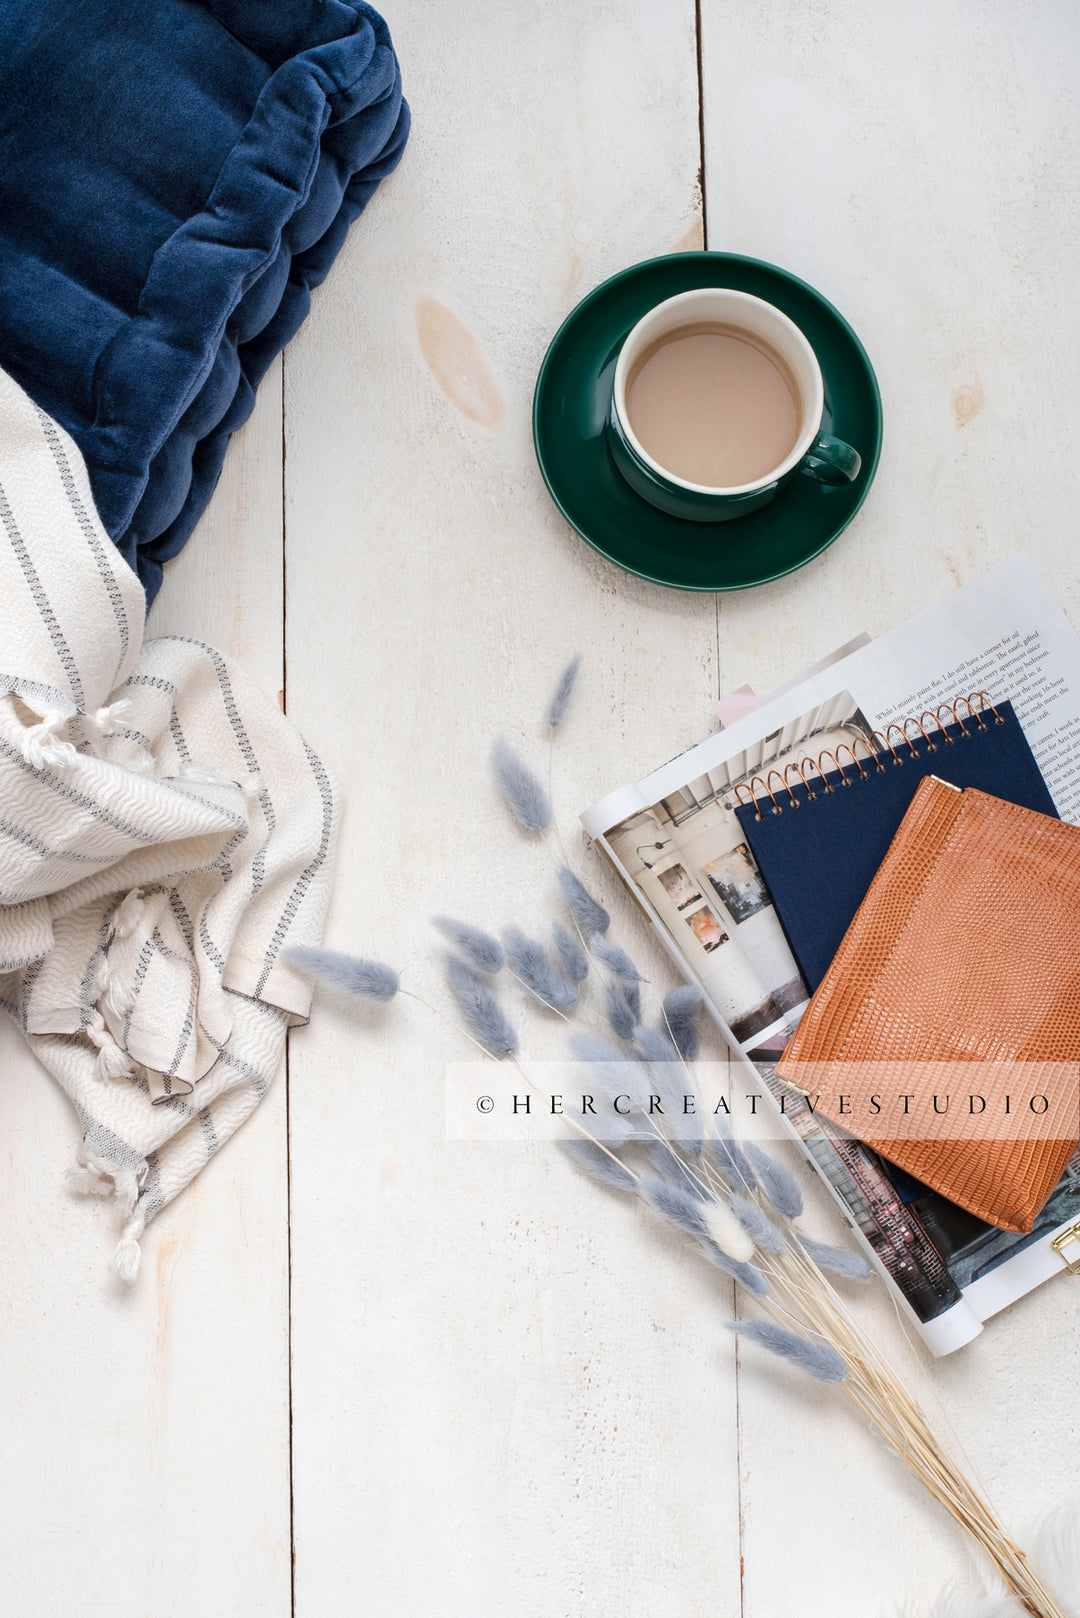 Coffee, Bunny Tail & notebook on Floor, Styled Stock